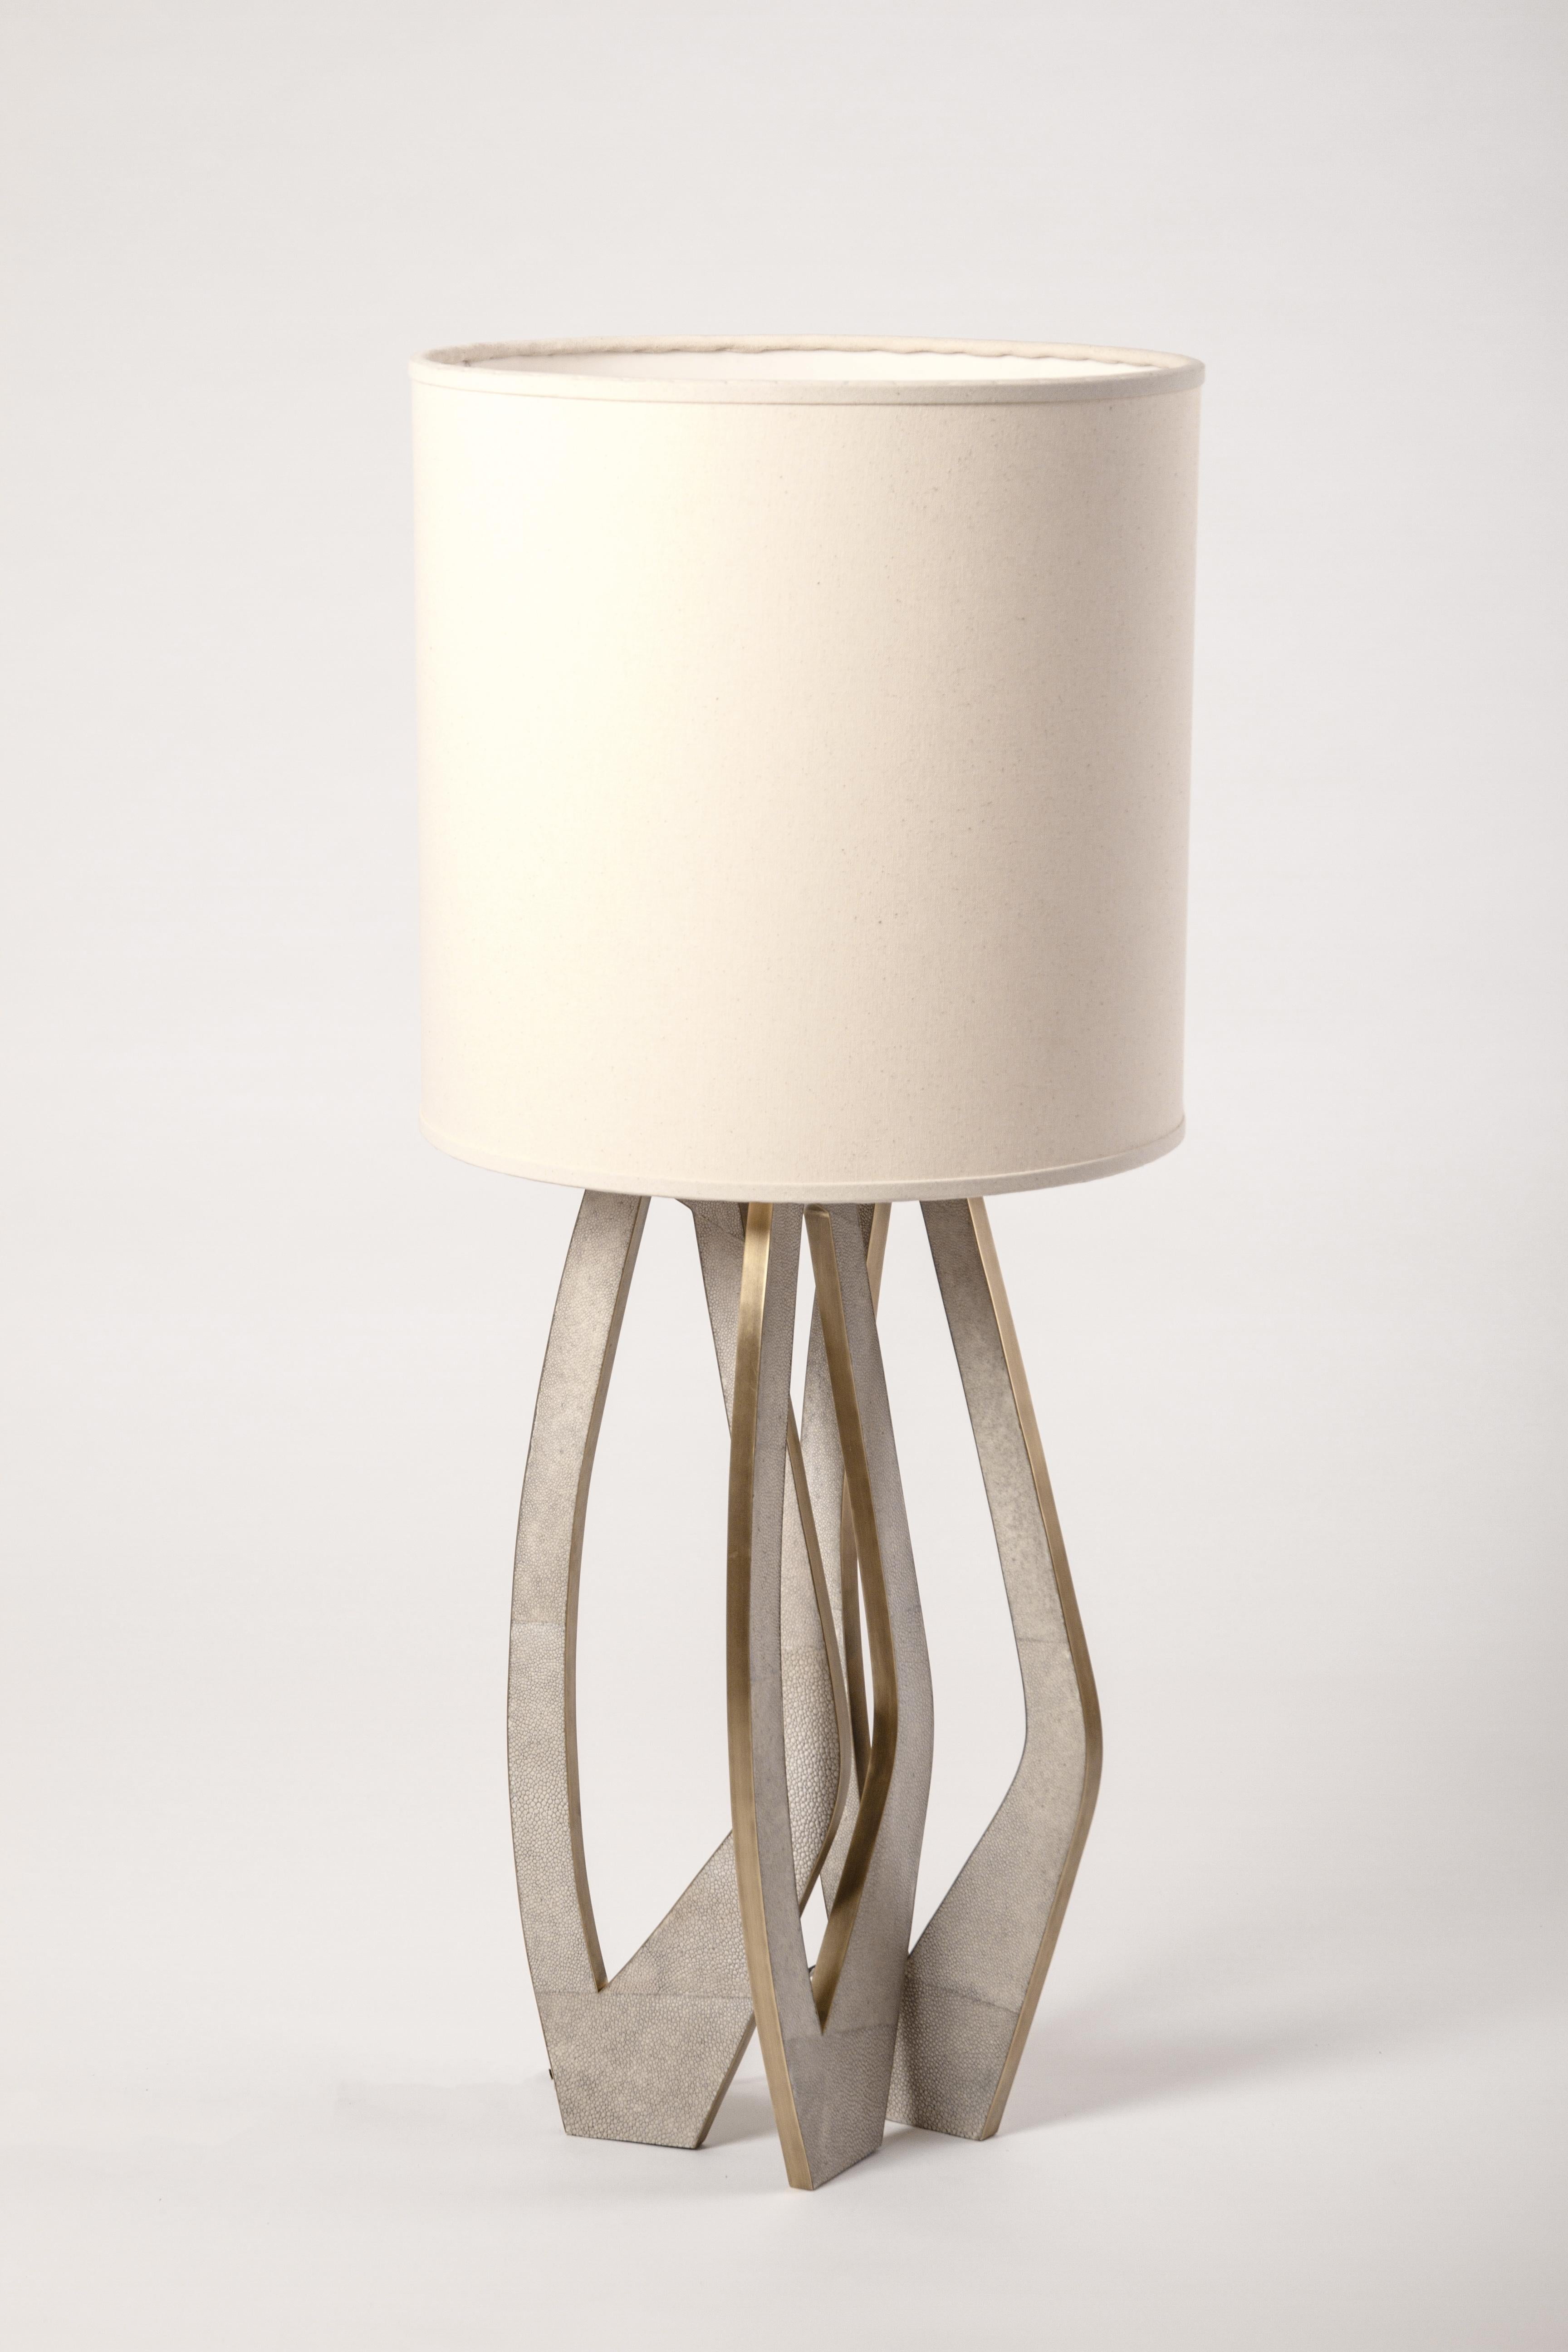 The Petal lamp inlaid in cream shagreen and bronze patina brass by R&Y Augousti is a beautiful piece with it’s intricate cutout detailing and inlaid legs. Shade included. Available in other finishes, see images at end of slide. 

The dimensions of